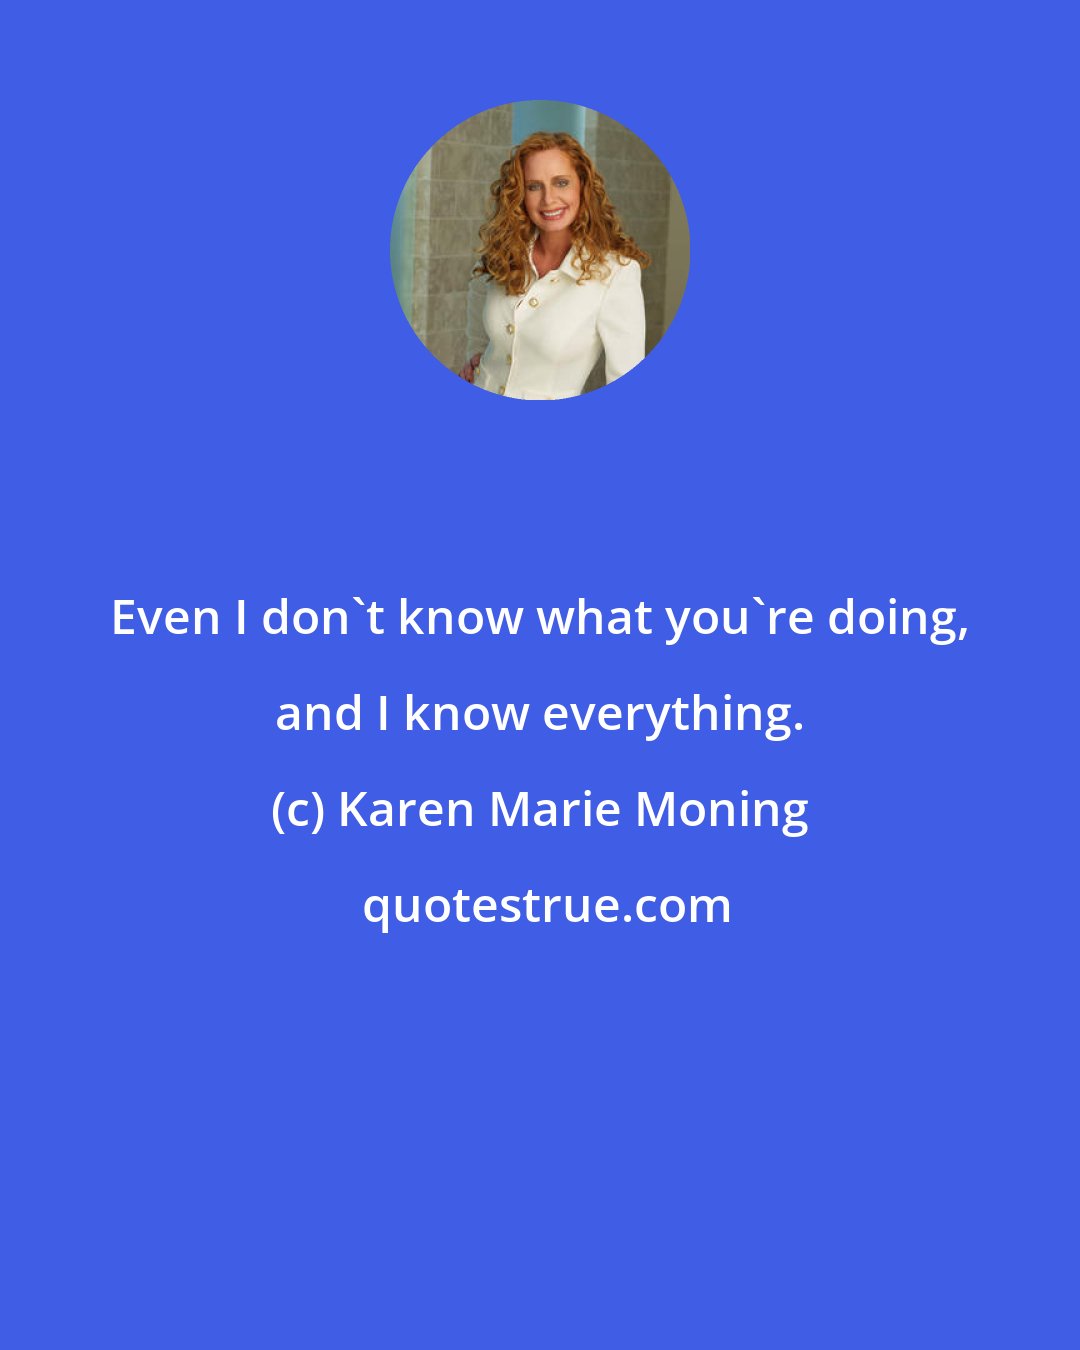 Karen Marie Moning: Even I don't know what you're doing, and I know everything.